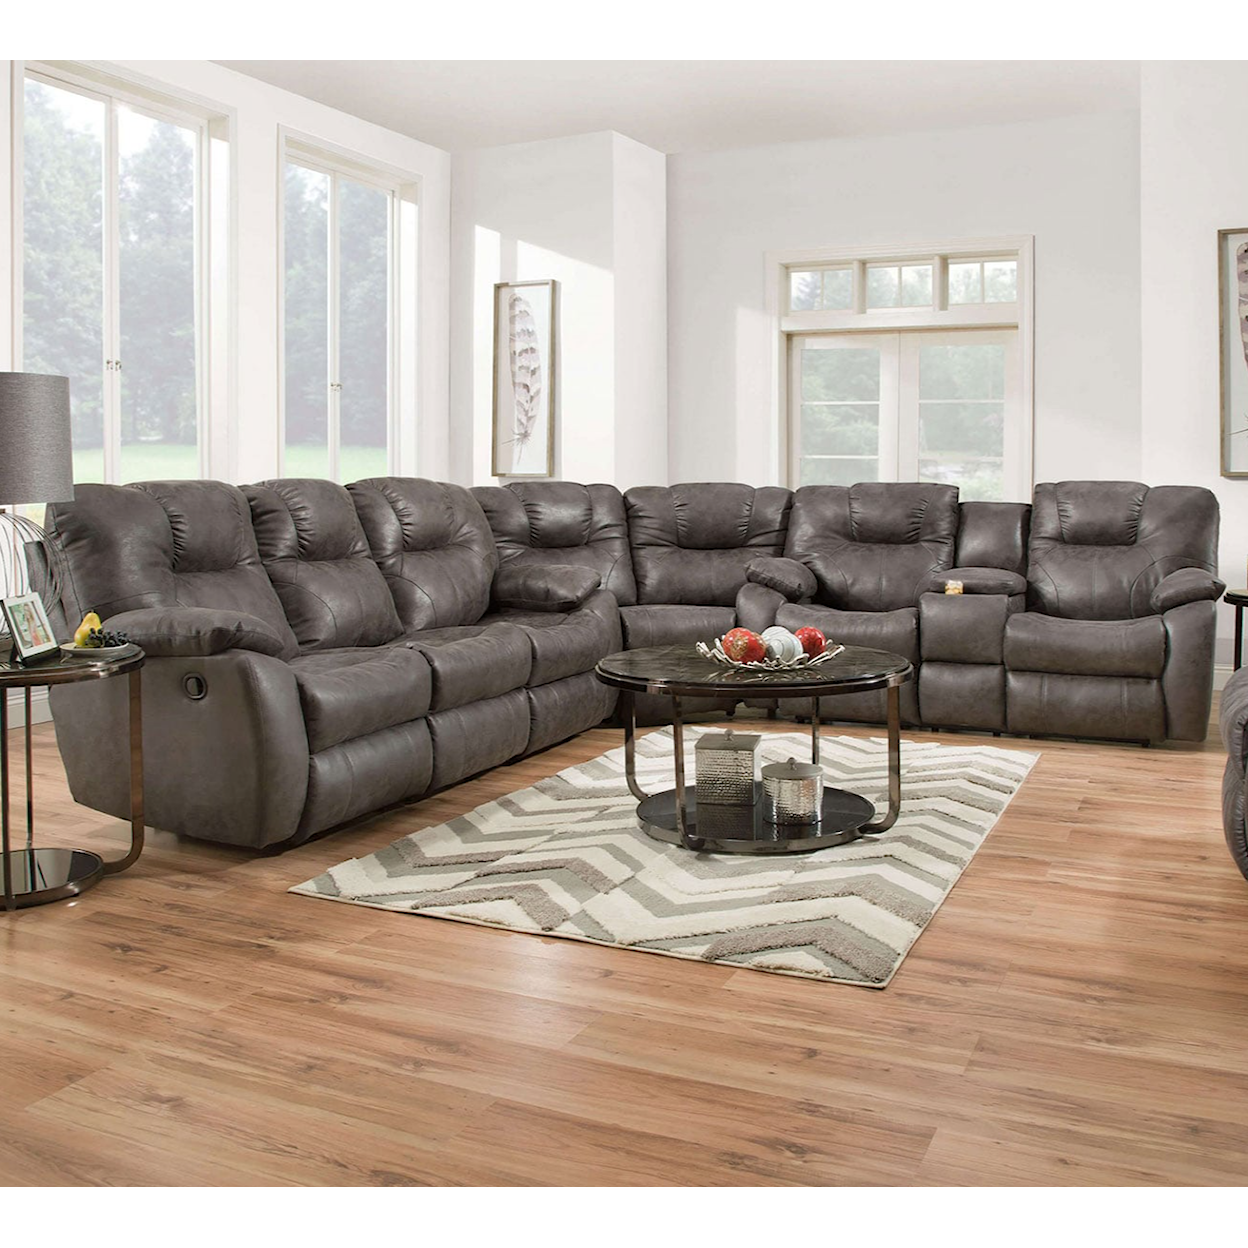 Powell's Motion Avalon 3-Piece Reclining Sectional